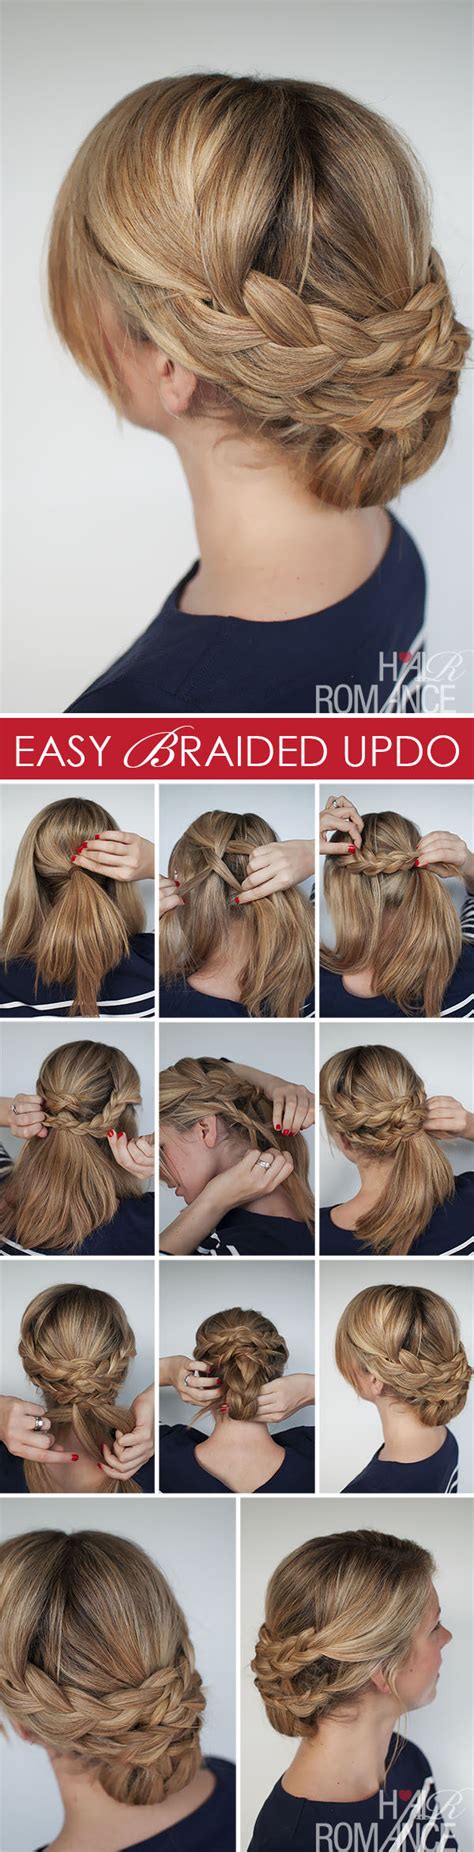 Hairstyle How To Easy Braided Updo Tutorial Hair Romance